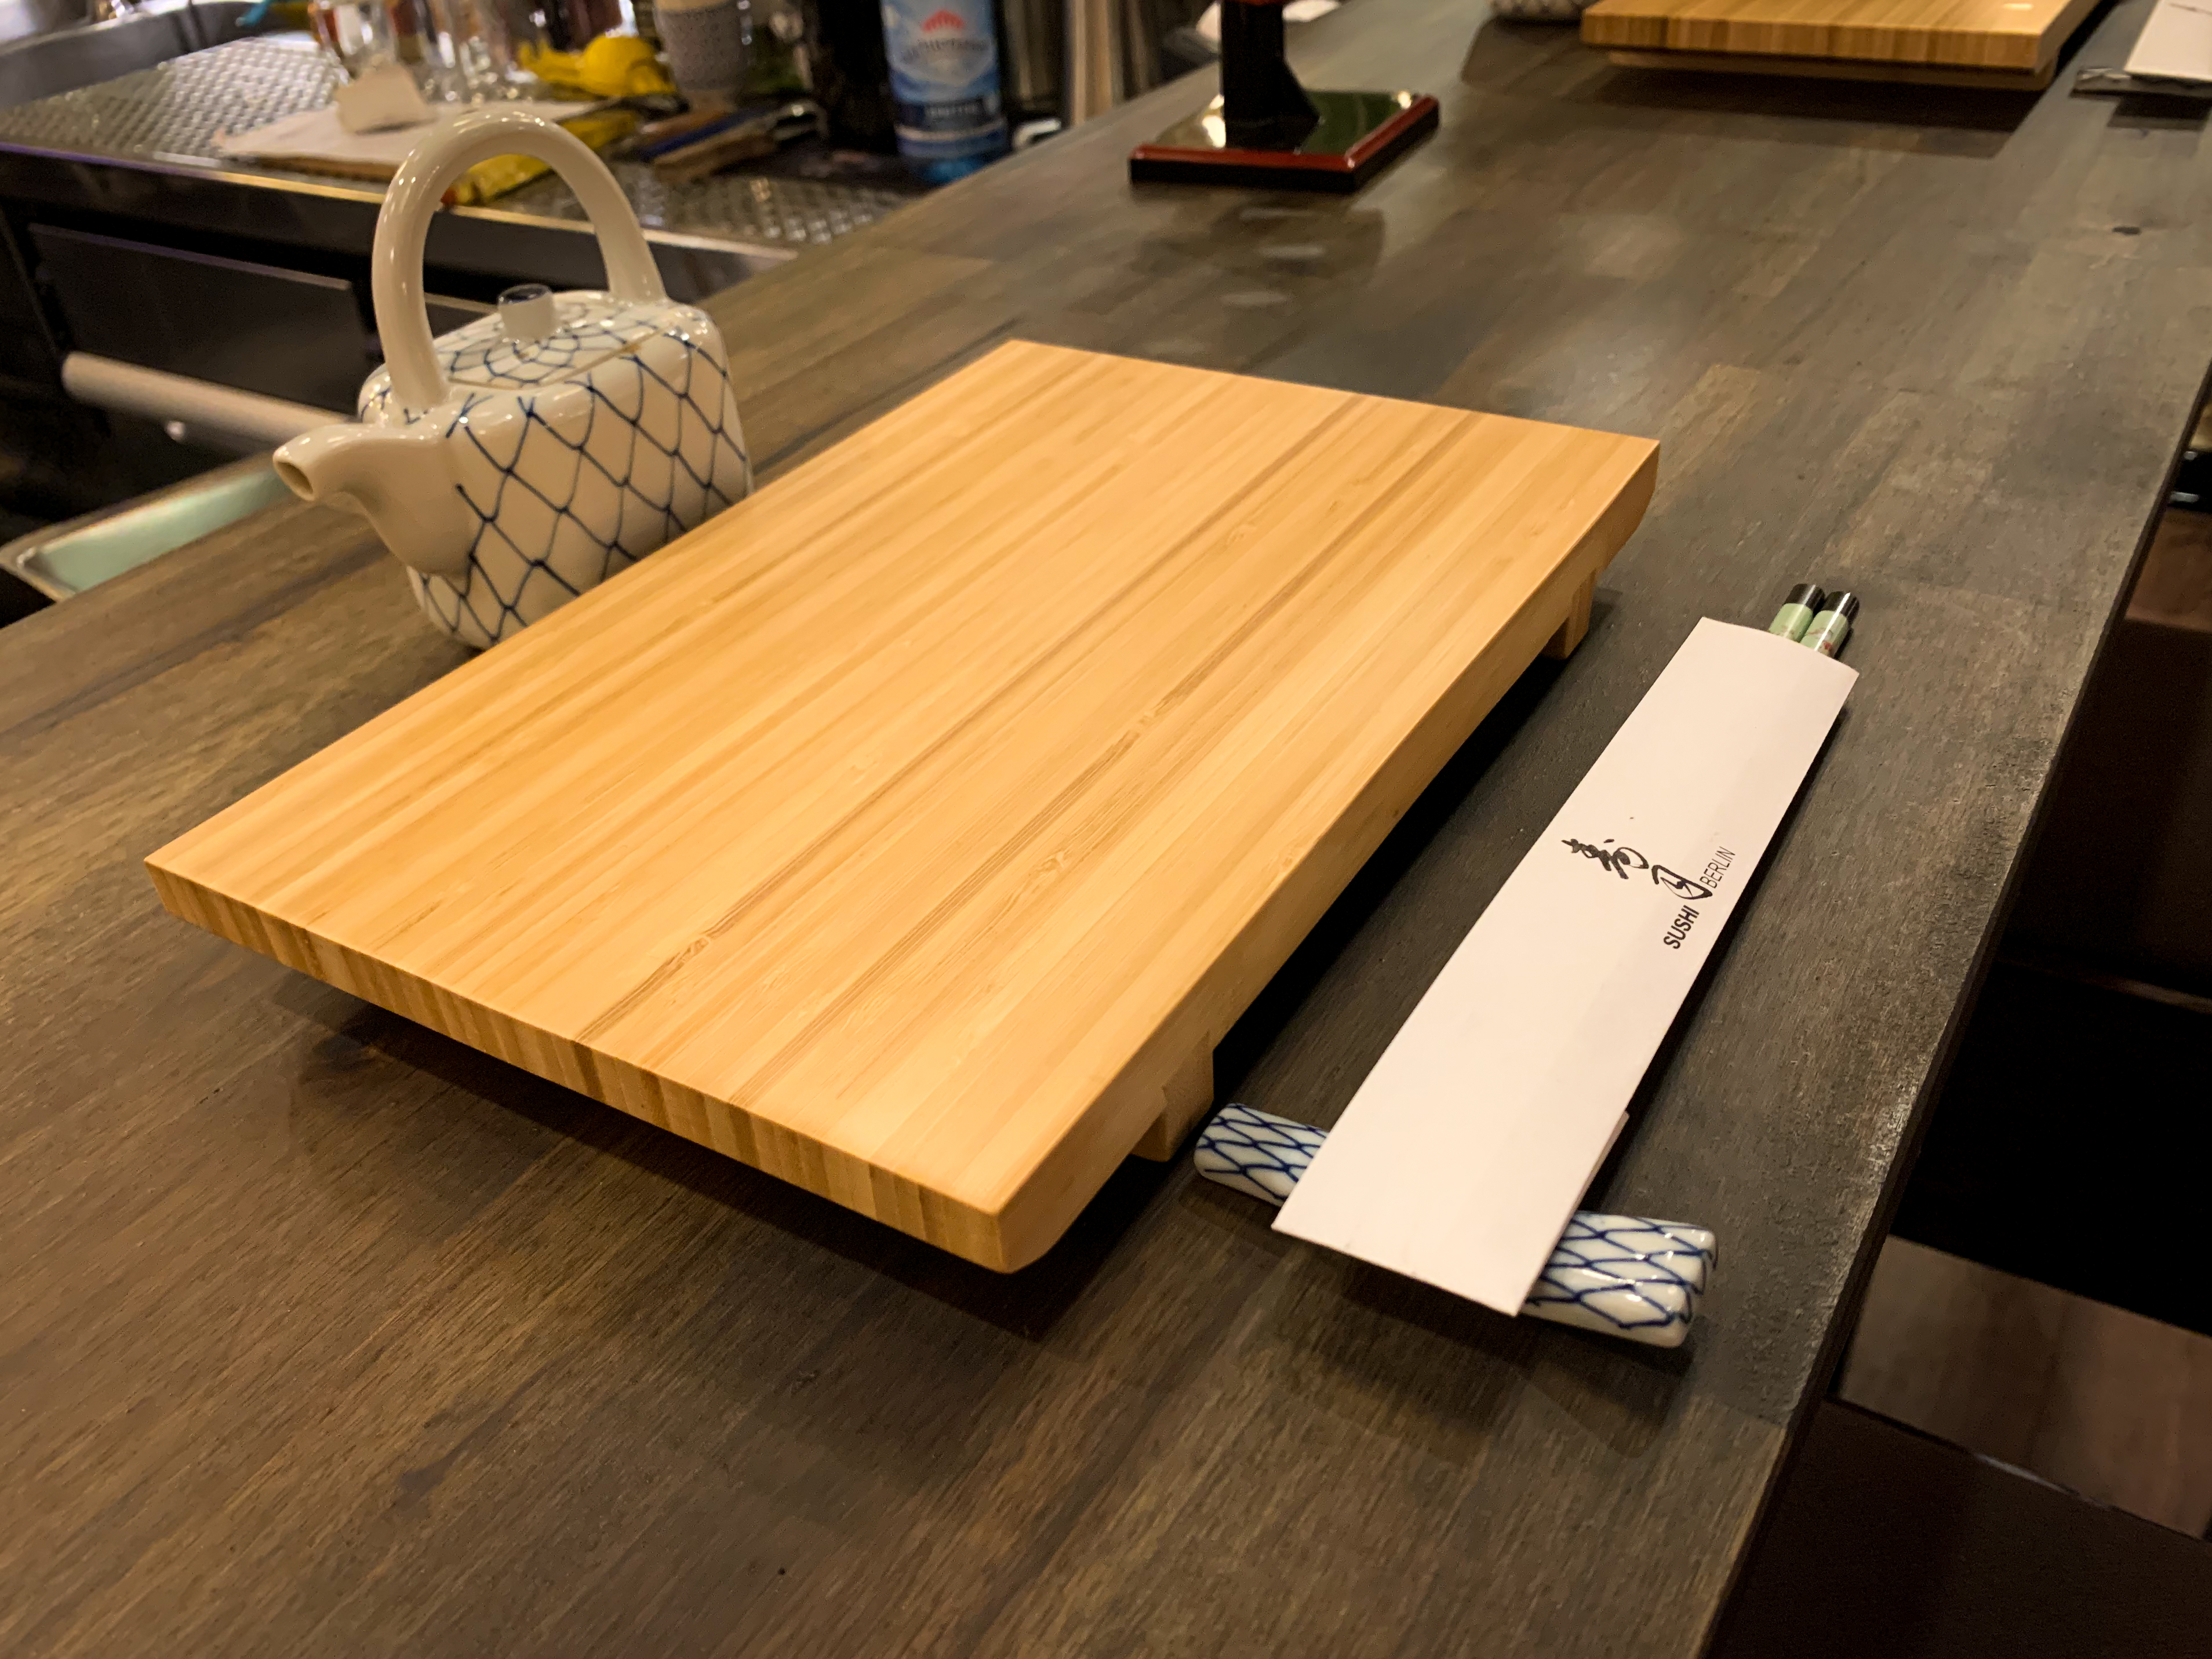 Wooden plate over the bar table with chopsticks